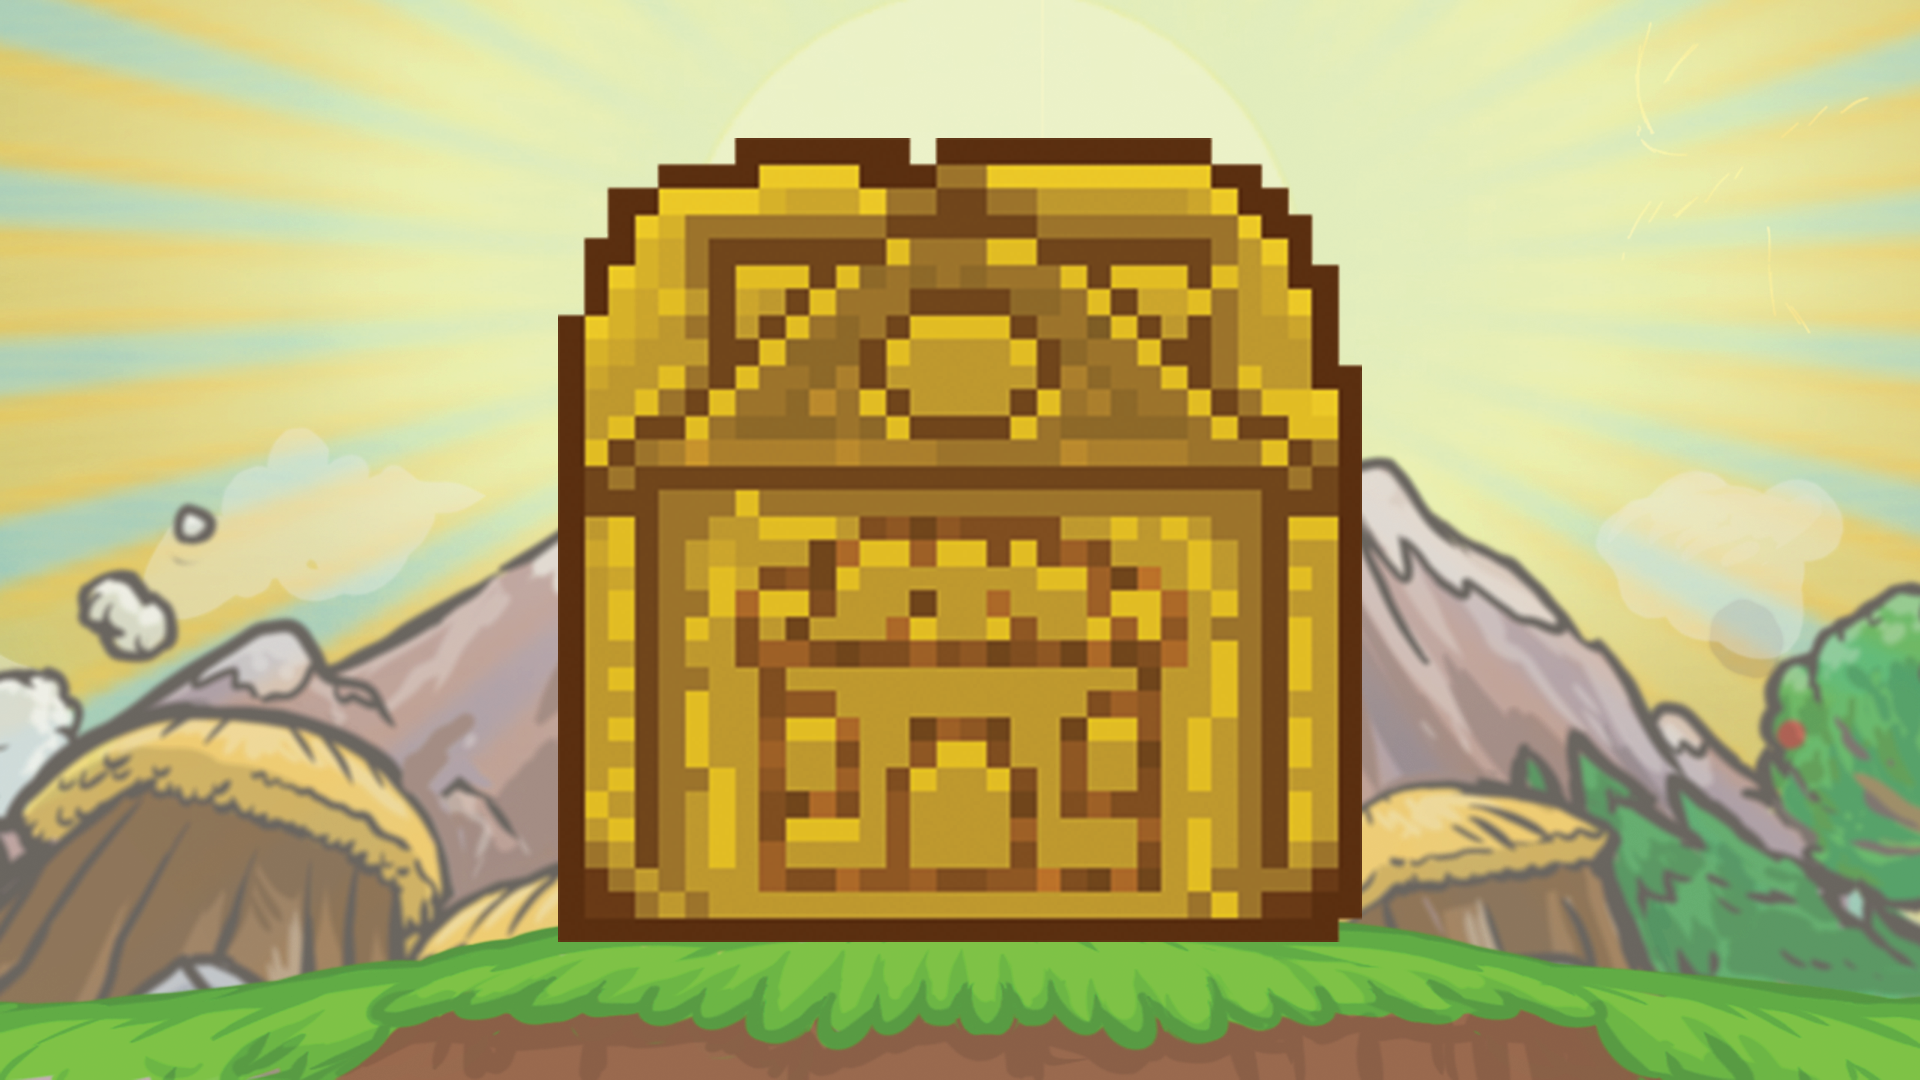 Icon for Remodeling